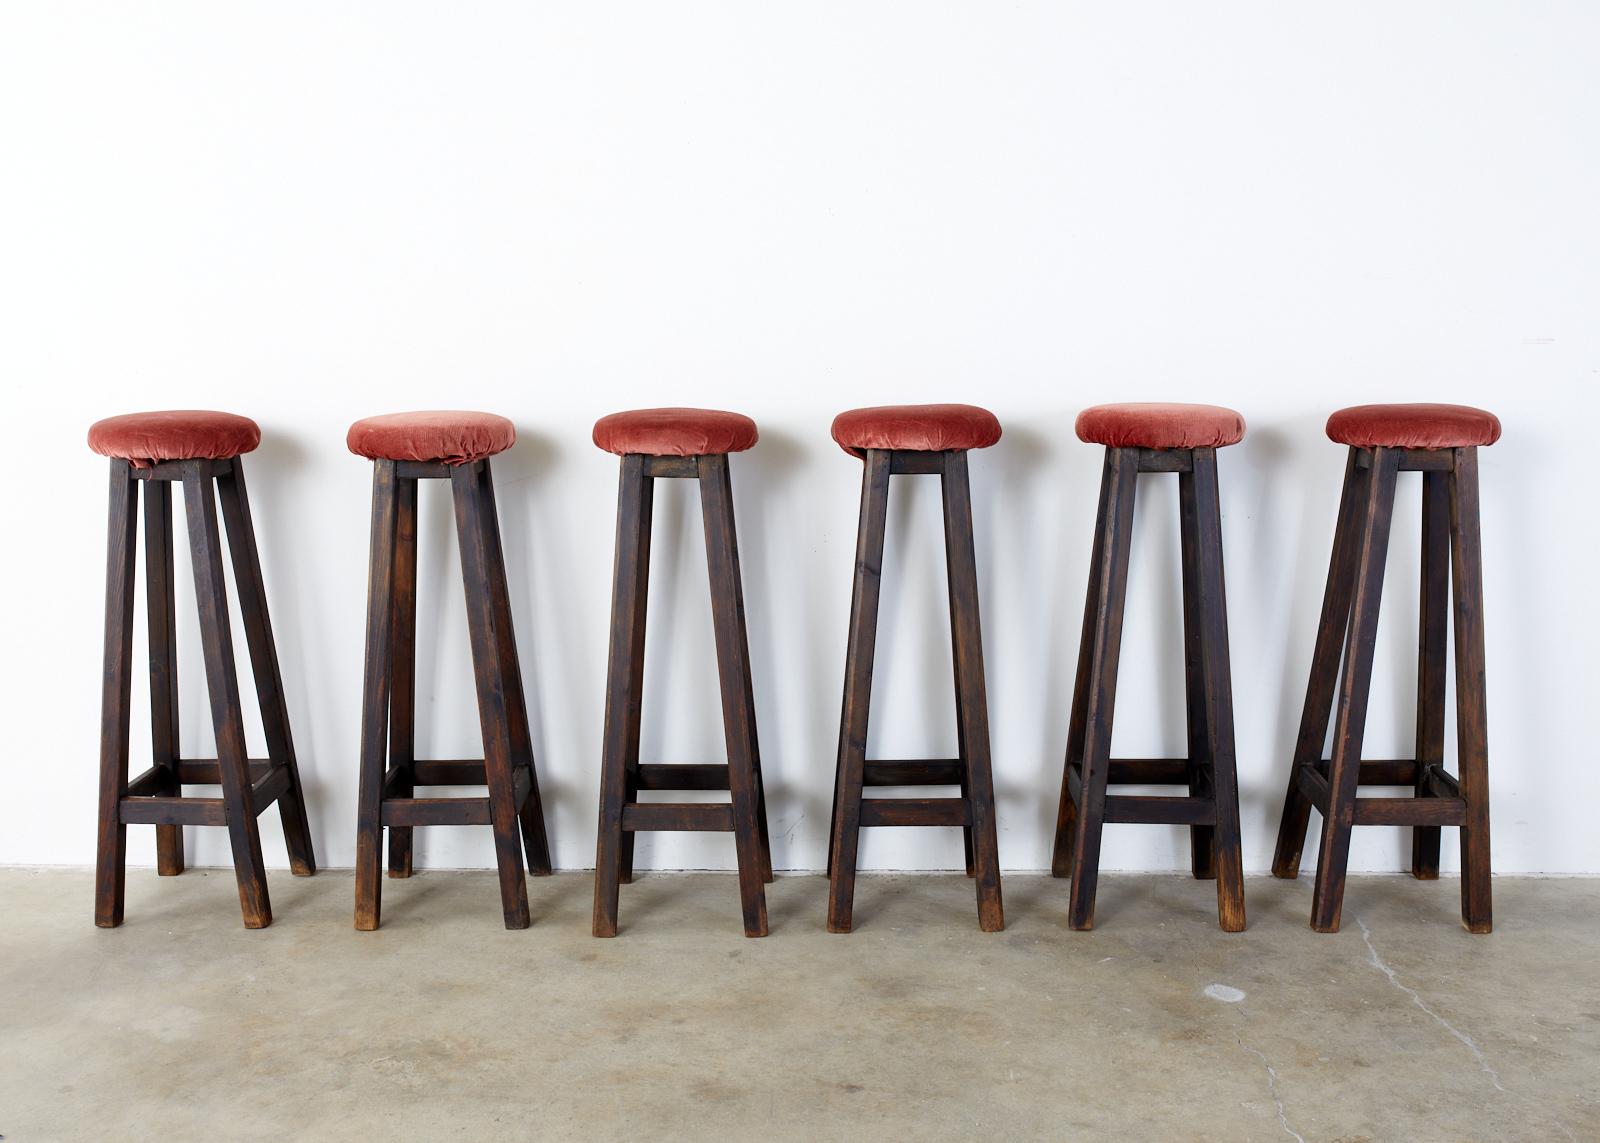 Rustic set of six matching pub style barstools featuring tall, narrow frames, crafted from oak with chambered legs conjoined by stretchers. Dark finish on the oak has an aged, faded patina. Topped with velvet covered seat cushions that would benefit